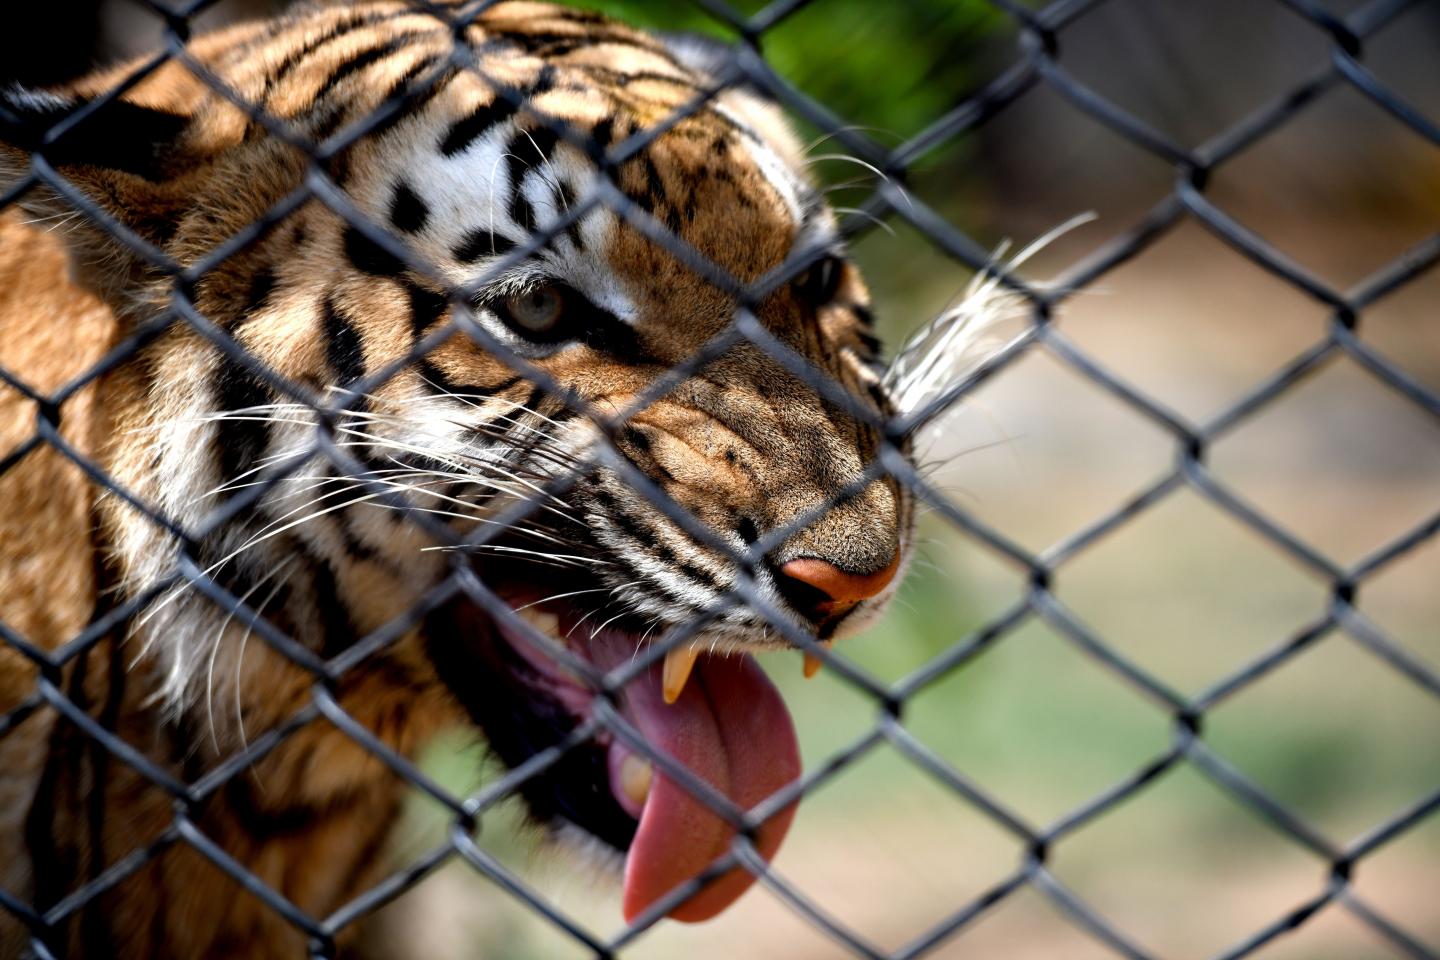 ANIMAL RIGHTS ACTIVISTS SET FIRE TO ZOO »